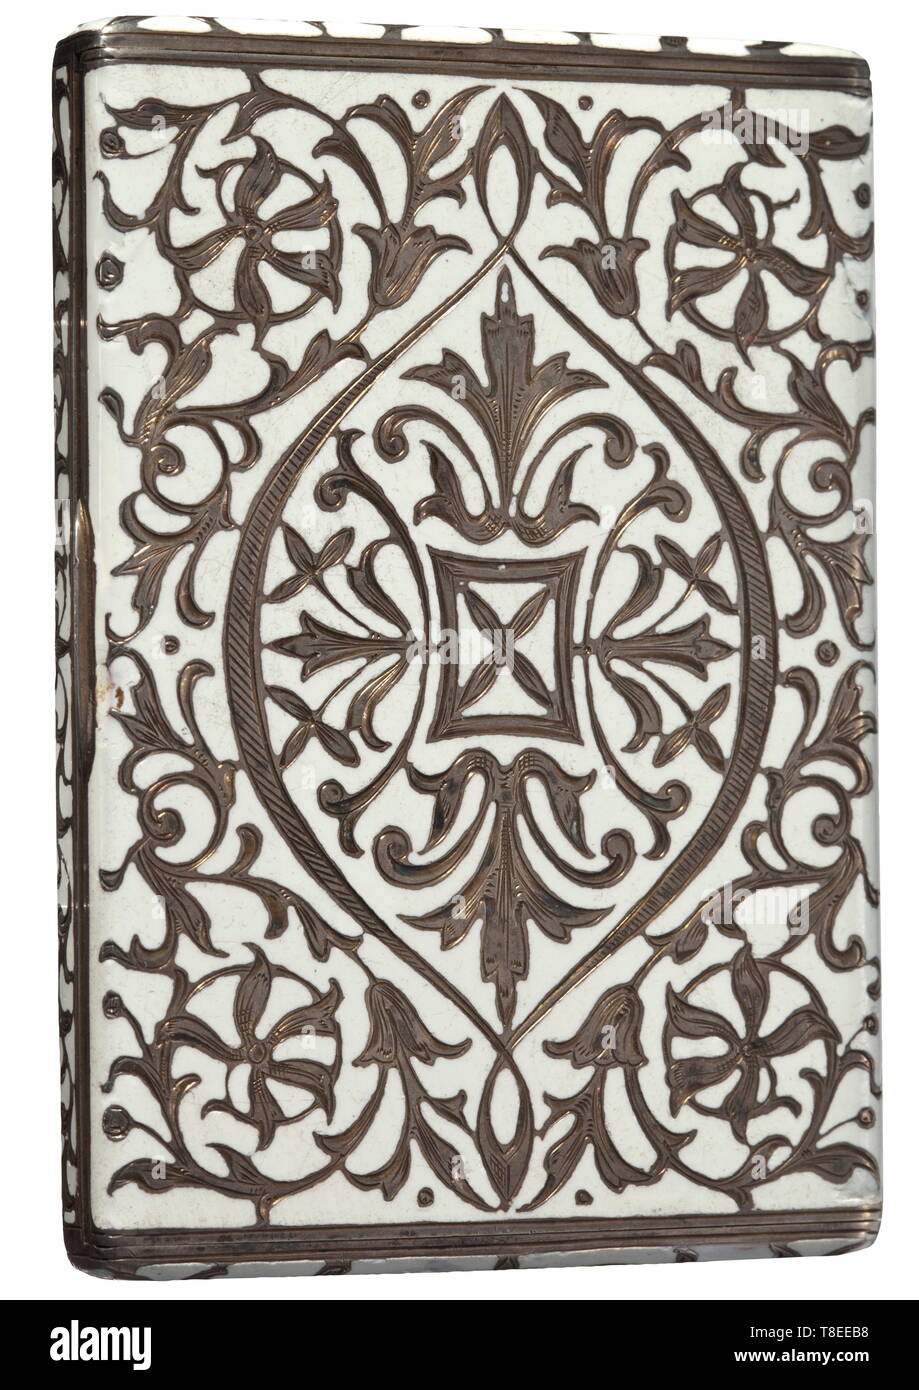 Eva Braun (1912 - 1945) - a silver enamelled cigarette case Silver, white enamelled case with engraved floral design, gilt interior, mark of fineness '935' and imperial crown. 60 x 85 mm, 148 g. Inside: five Güldenring cigarettes by Haus Neuerburg. Provenance: Ilse Fucke-Michels, Eva Braun´s sister. According to her written confirmation (enclosed in copy), the case and a corresponding (no longer existent) silver cigarette holder were gifts from her employer, the photographer Heinrich Hoffmann. historic, historical, 20th century, 1930s, NS, National Socialism, Nazism, Third , Editorial-Use-Only Stock Photo